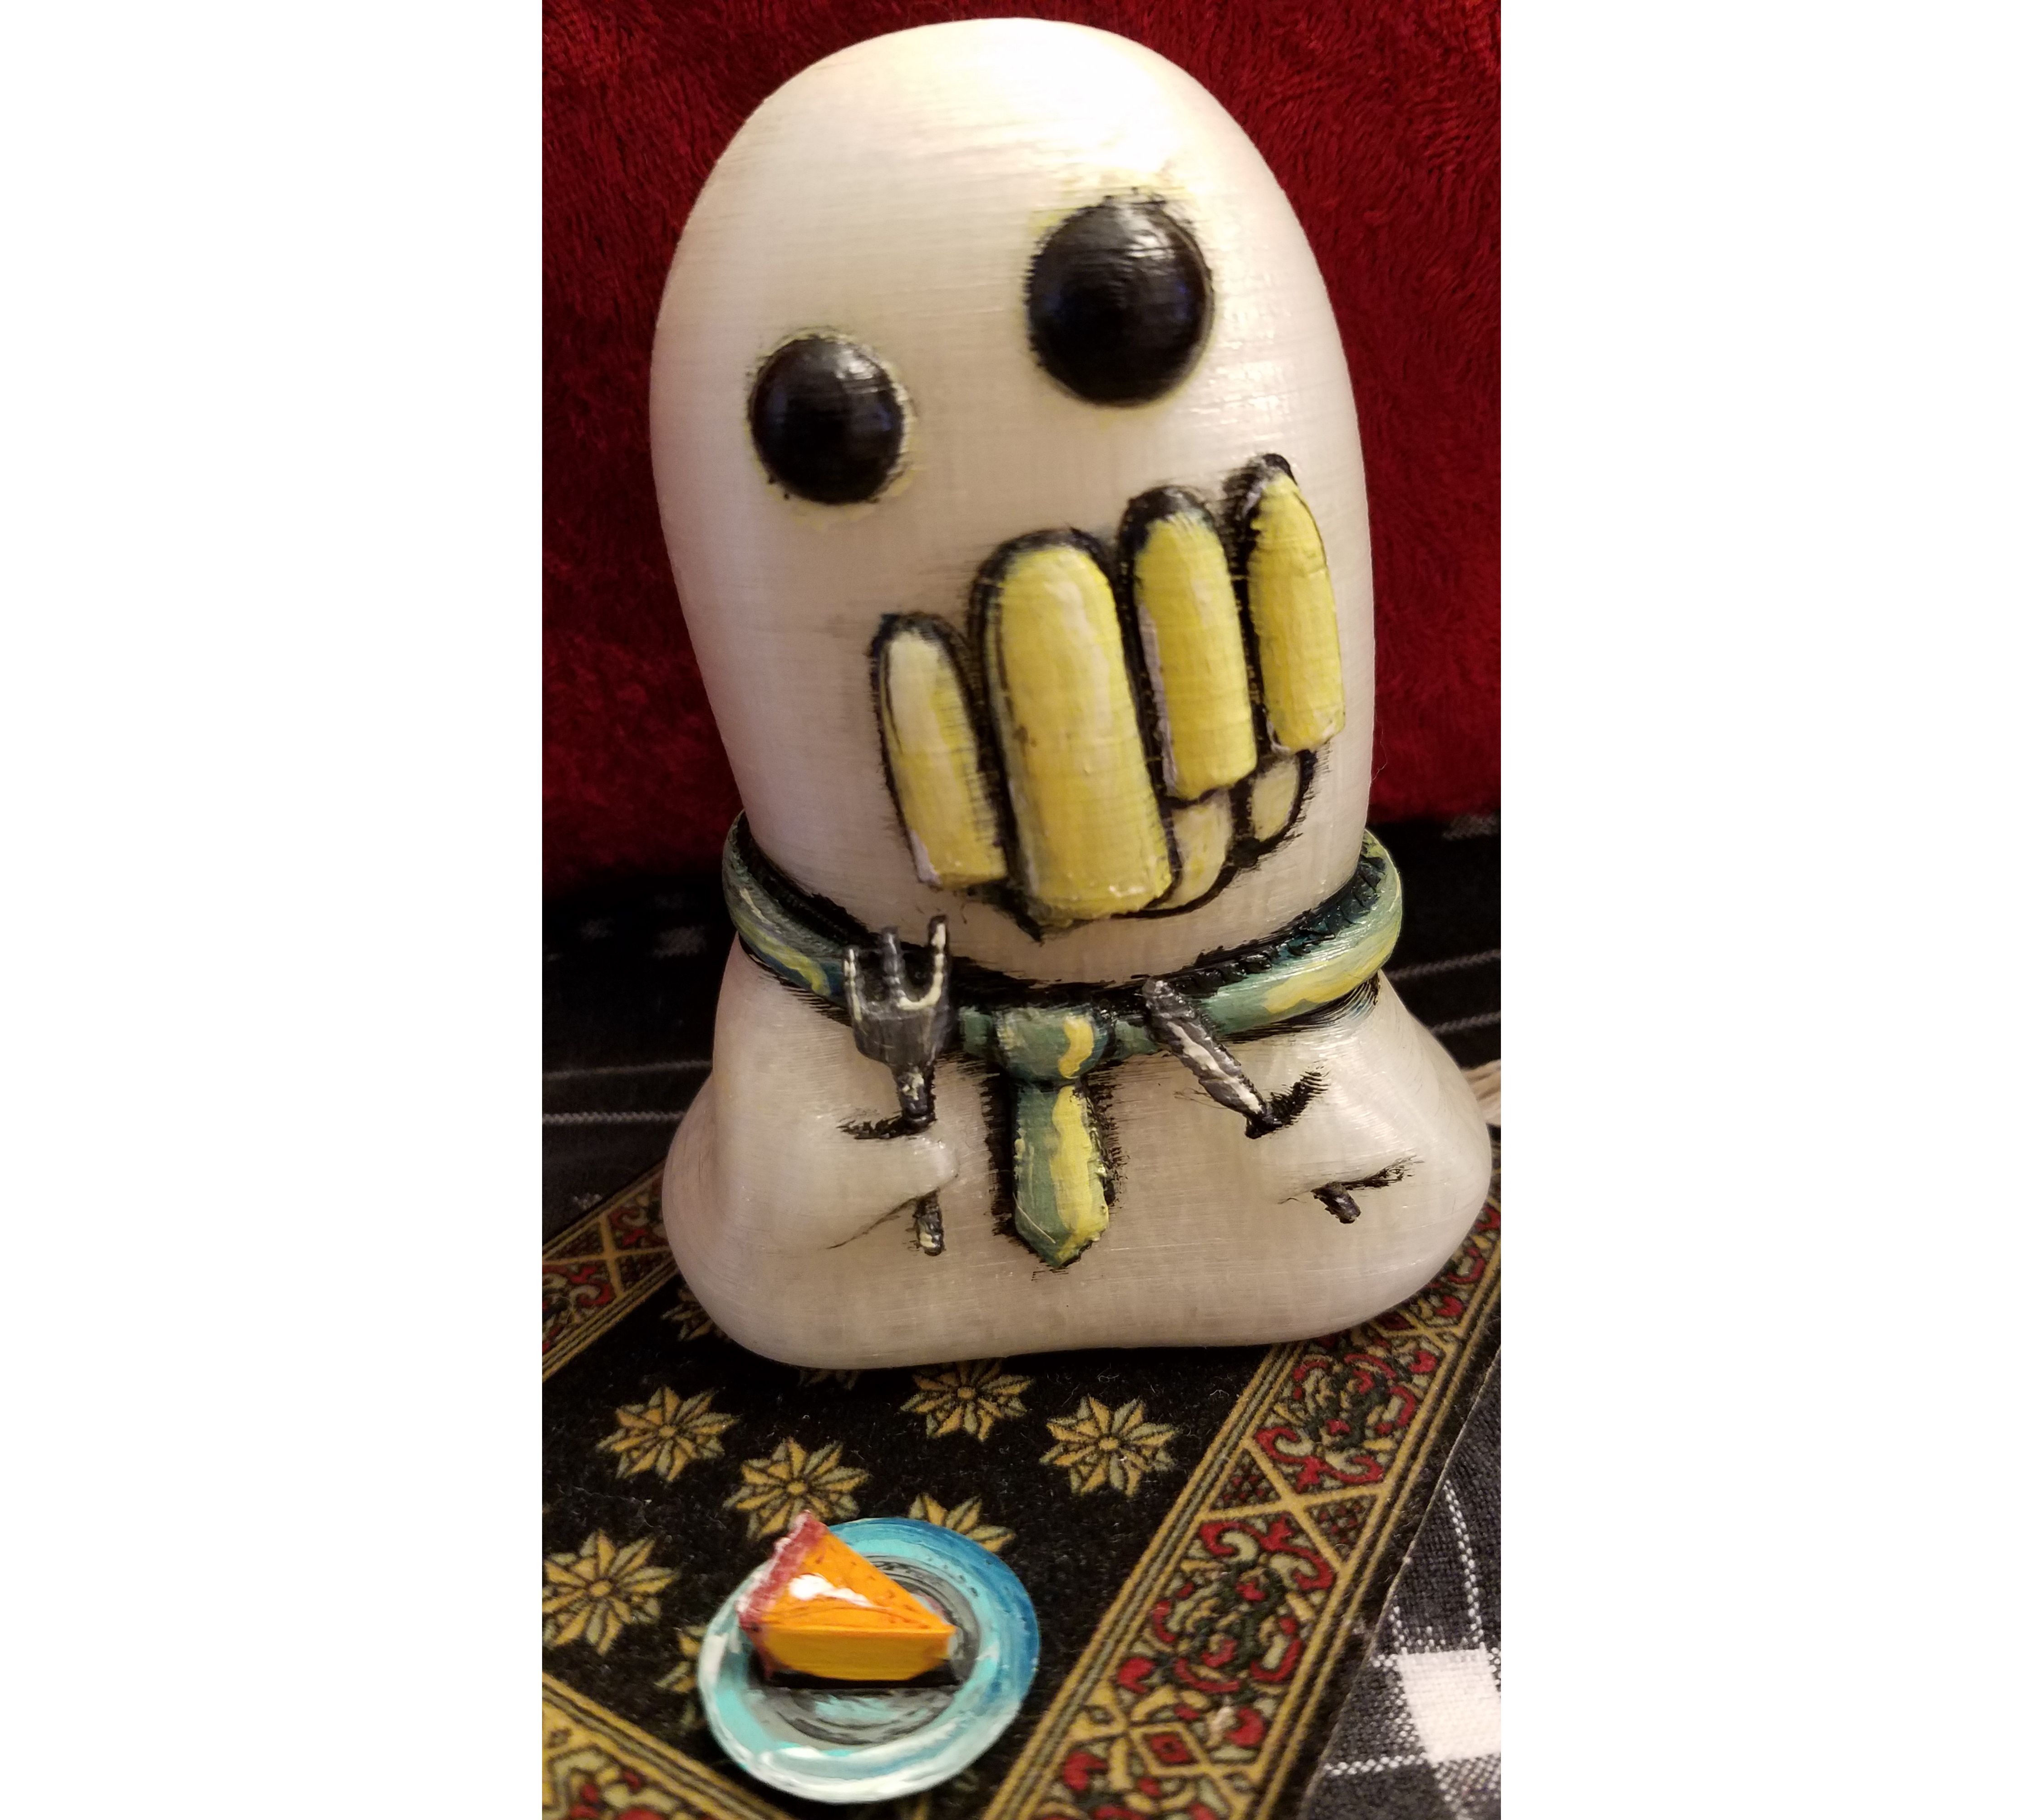 Ghosty the Pie Ghost